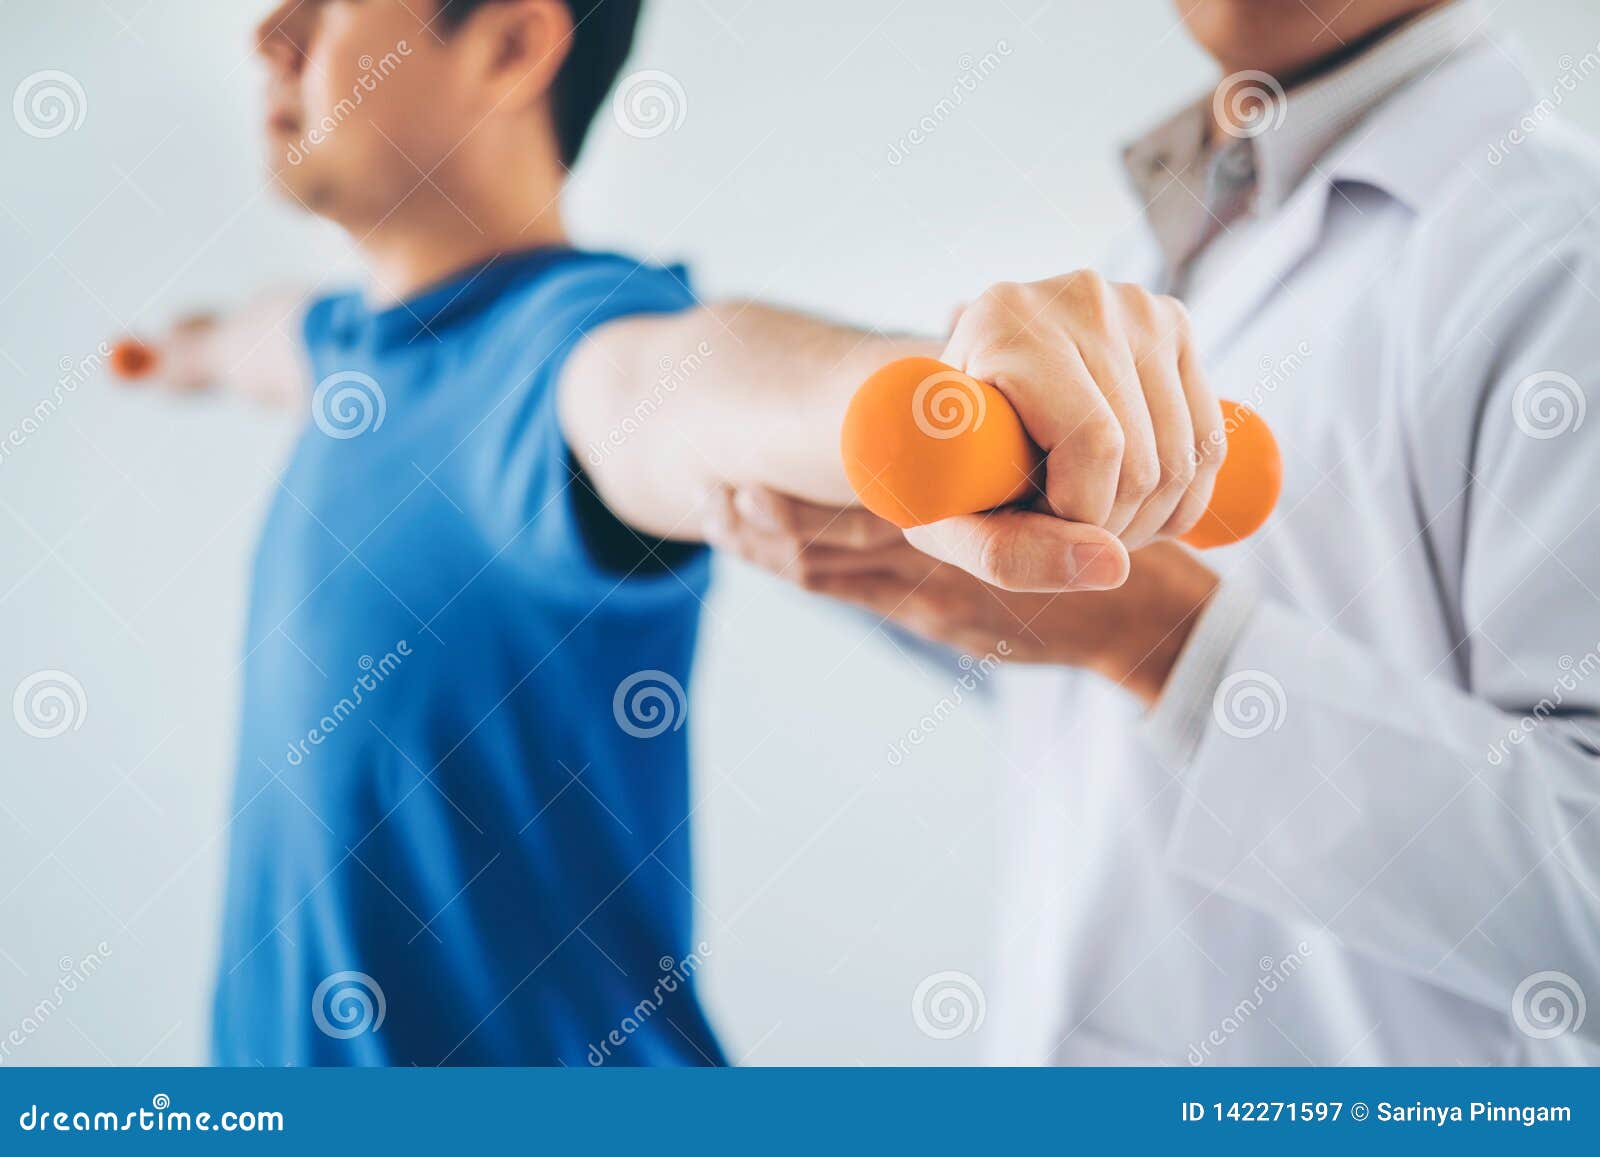 physiotherapist man giving exercise with dumbbell treatment about arm and shoulder of athlete male patient physical therapy